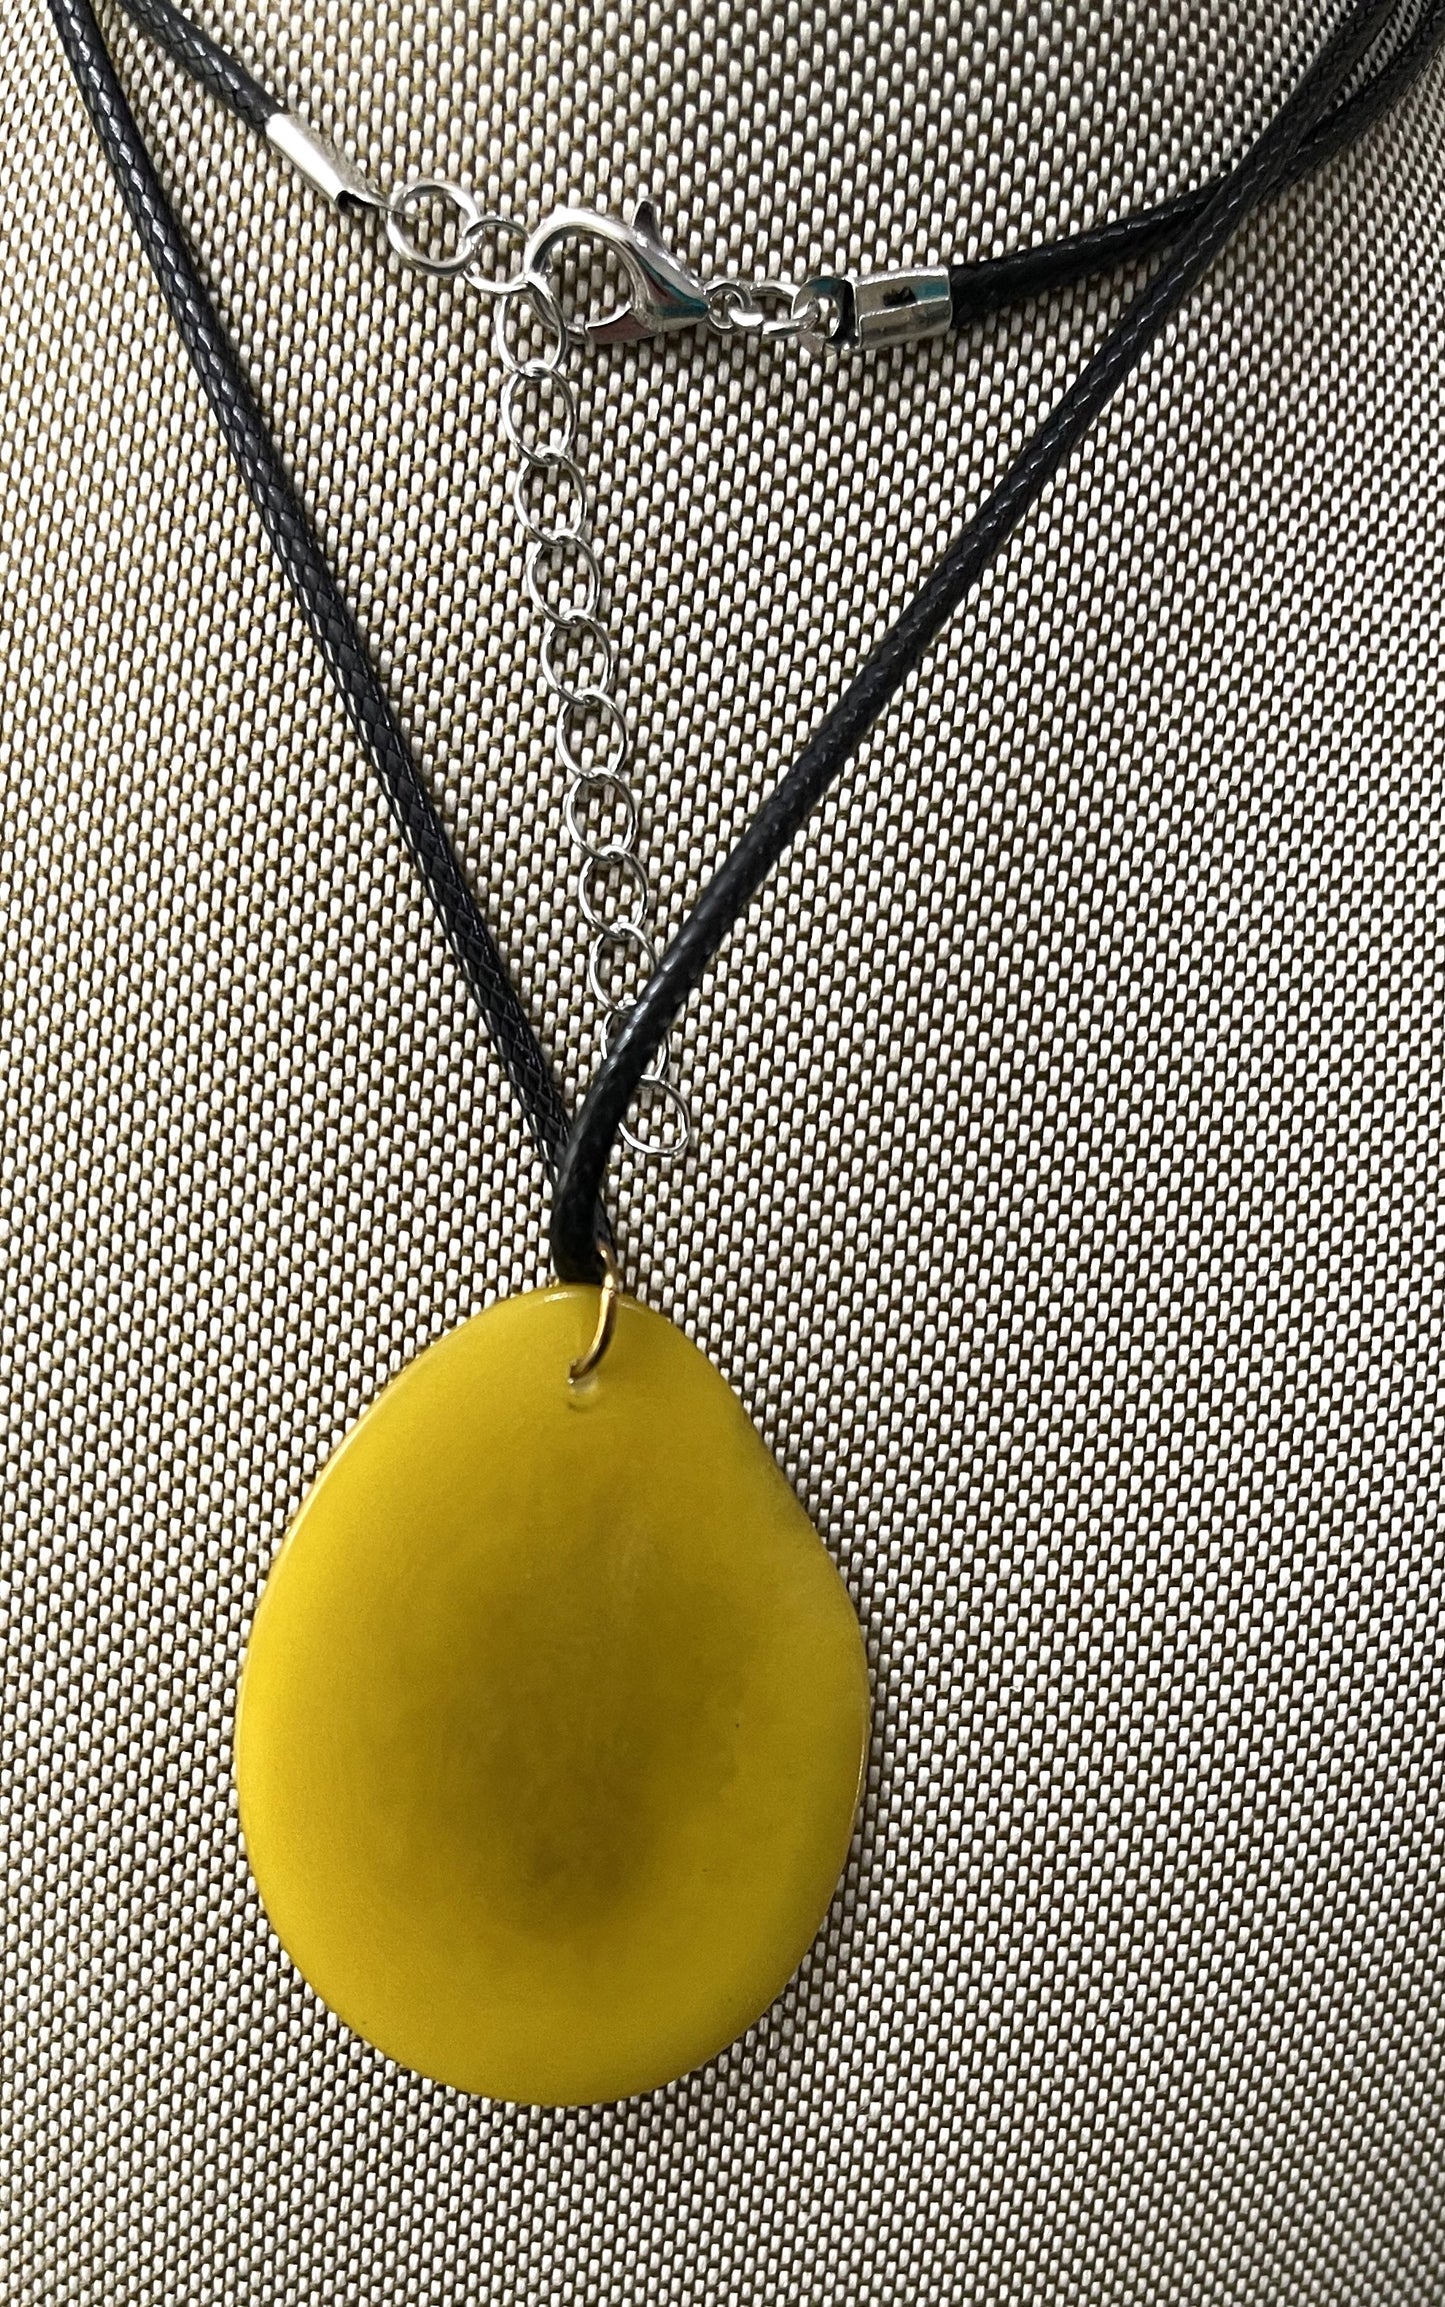 Tagua Carved Kitty Cat On Tagua Necklace Pendant Panama